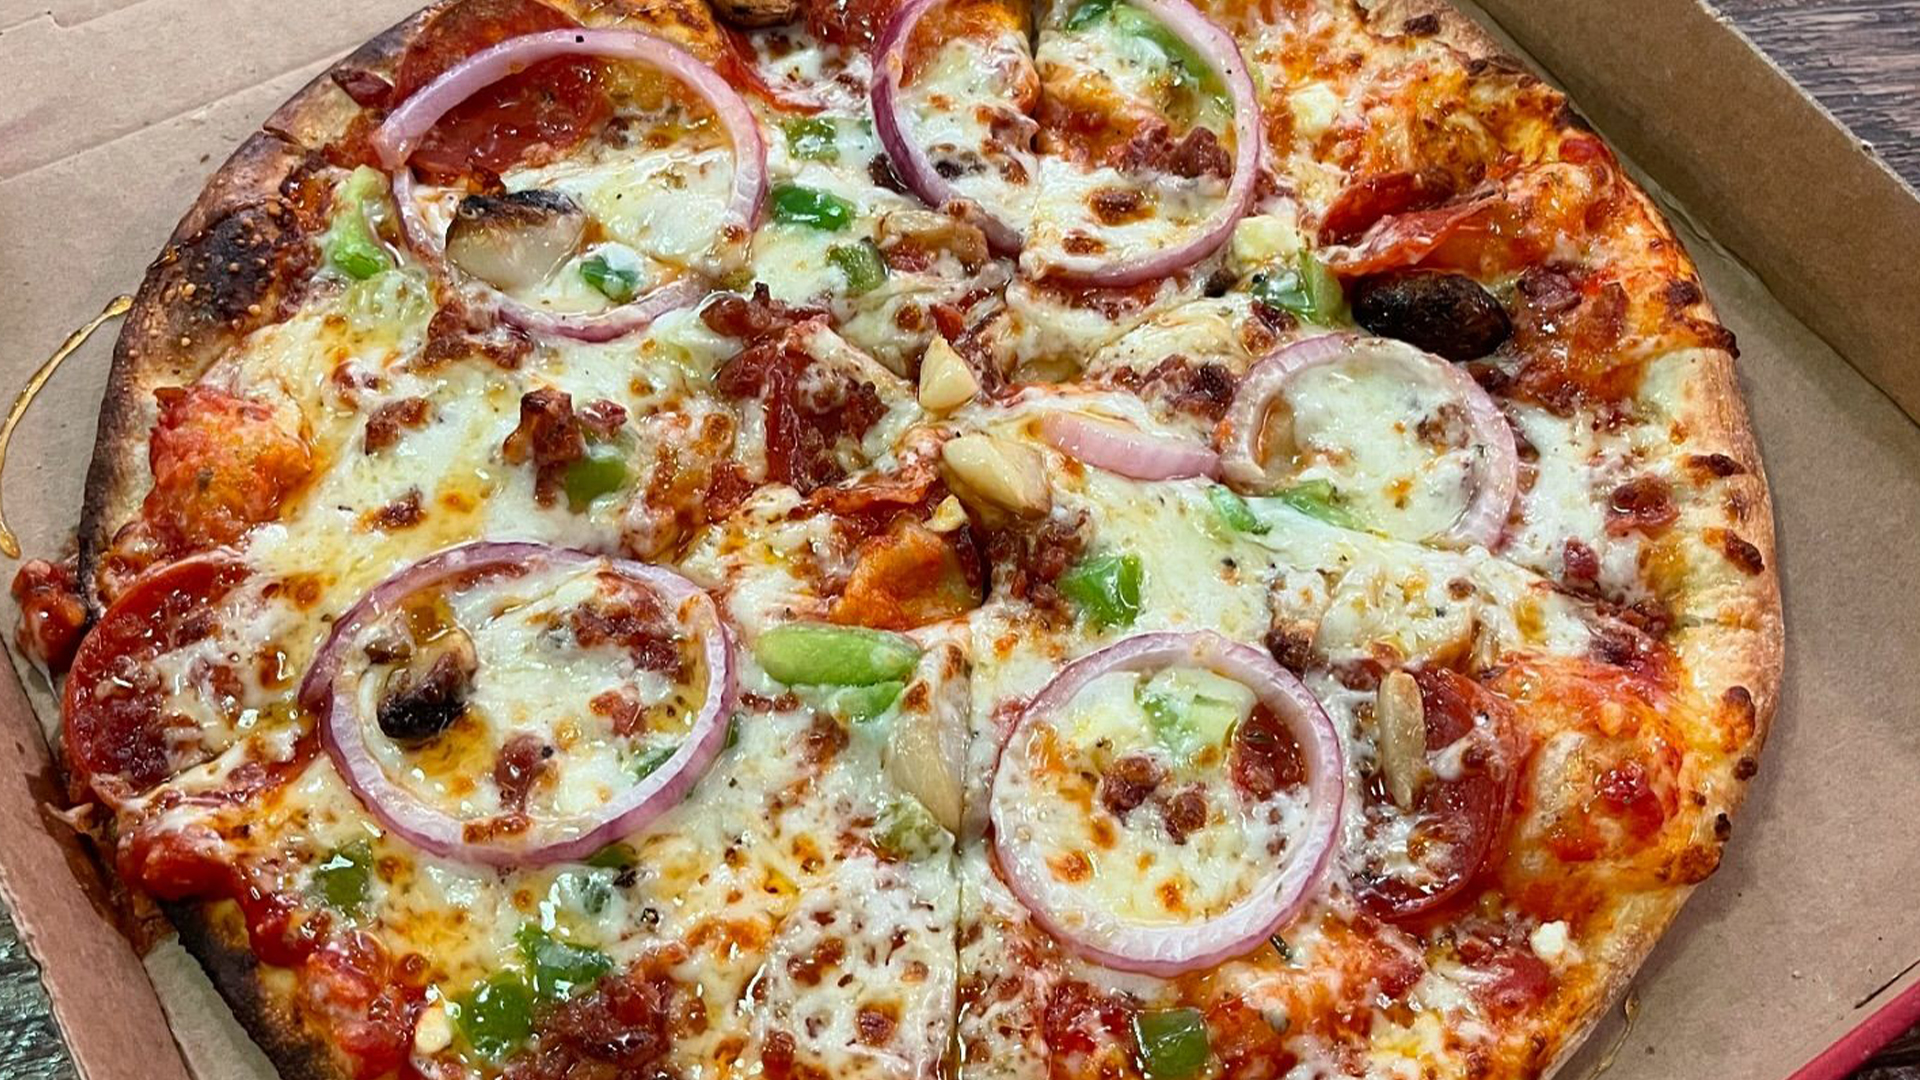 Popular chain and Blaze Pizza rival faces potential bankruptcy after 26 closures this year – fans may find out next week [Video]